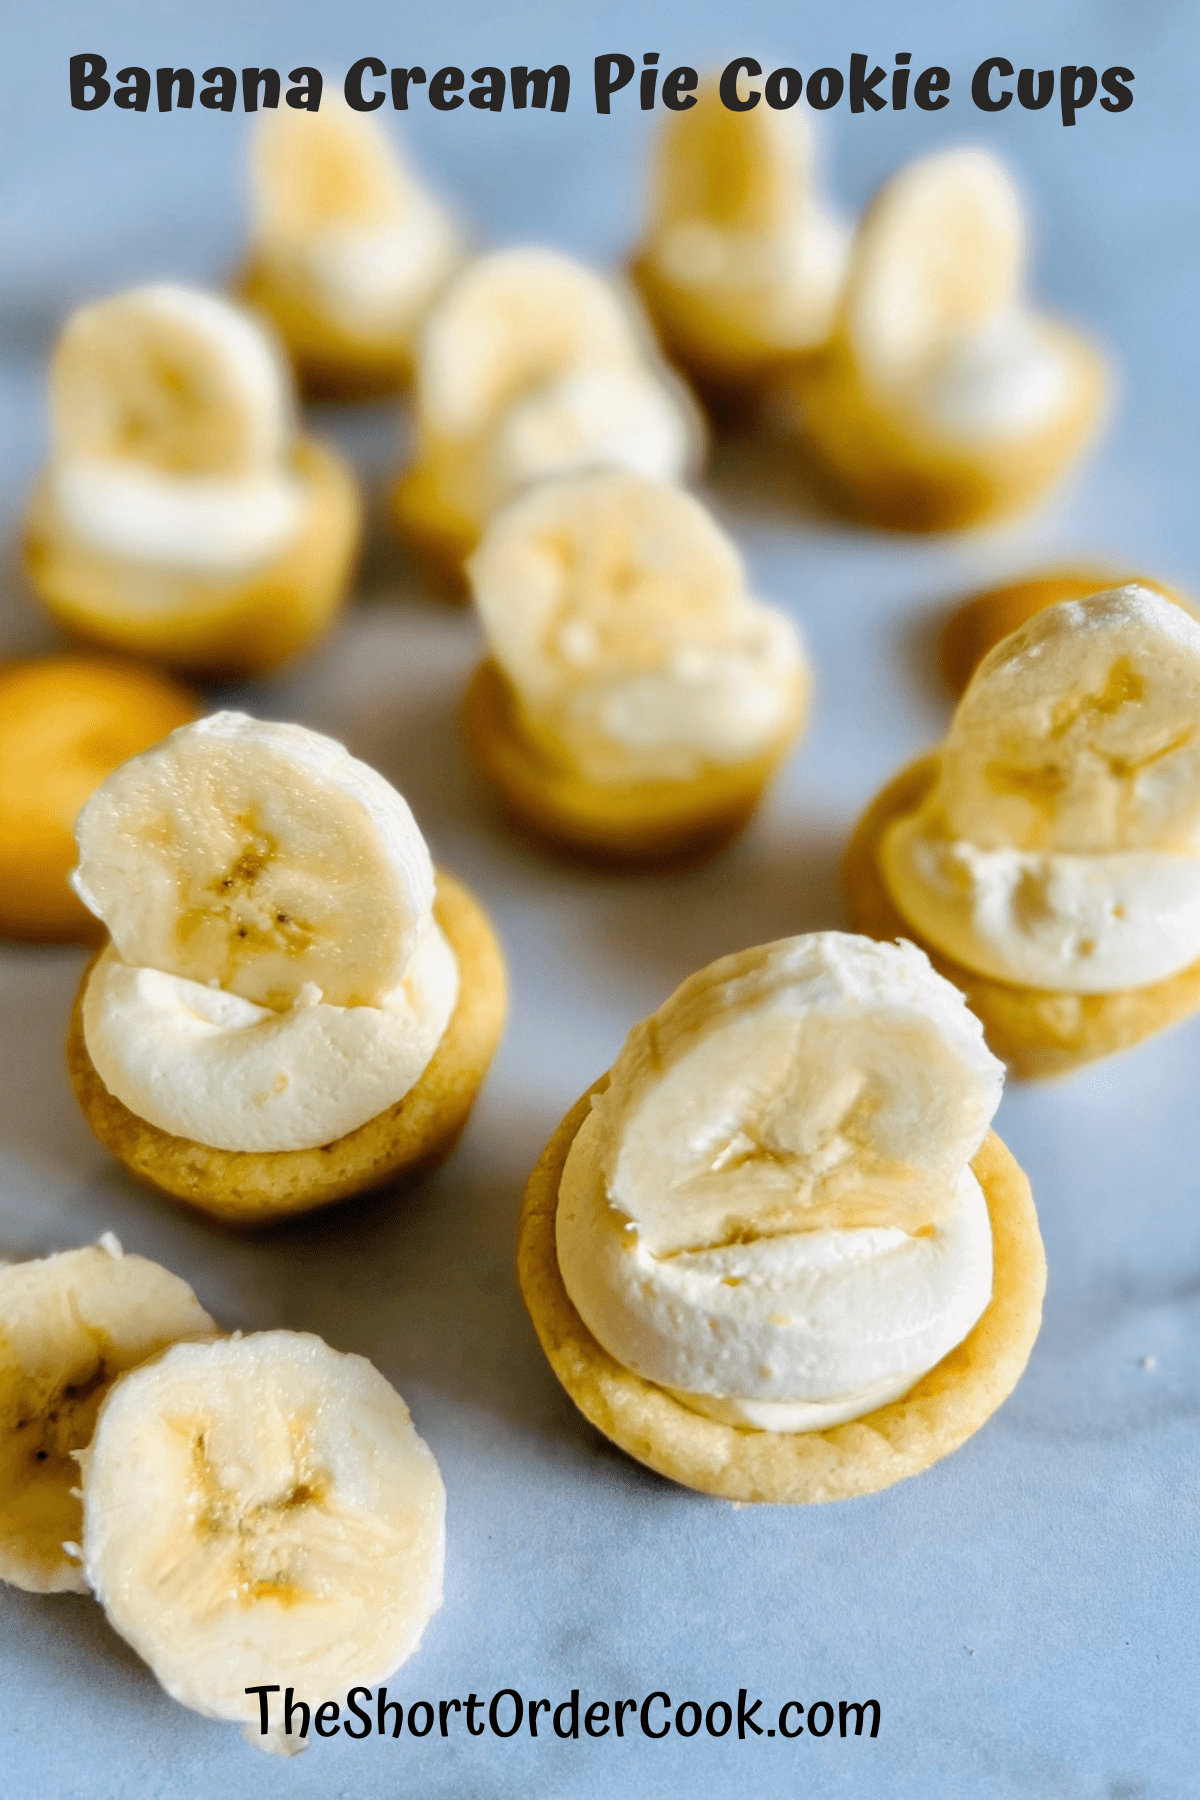 Banana Cream Pie Cookie Cups on a marble counter lined up ready to eat.